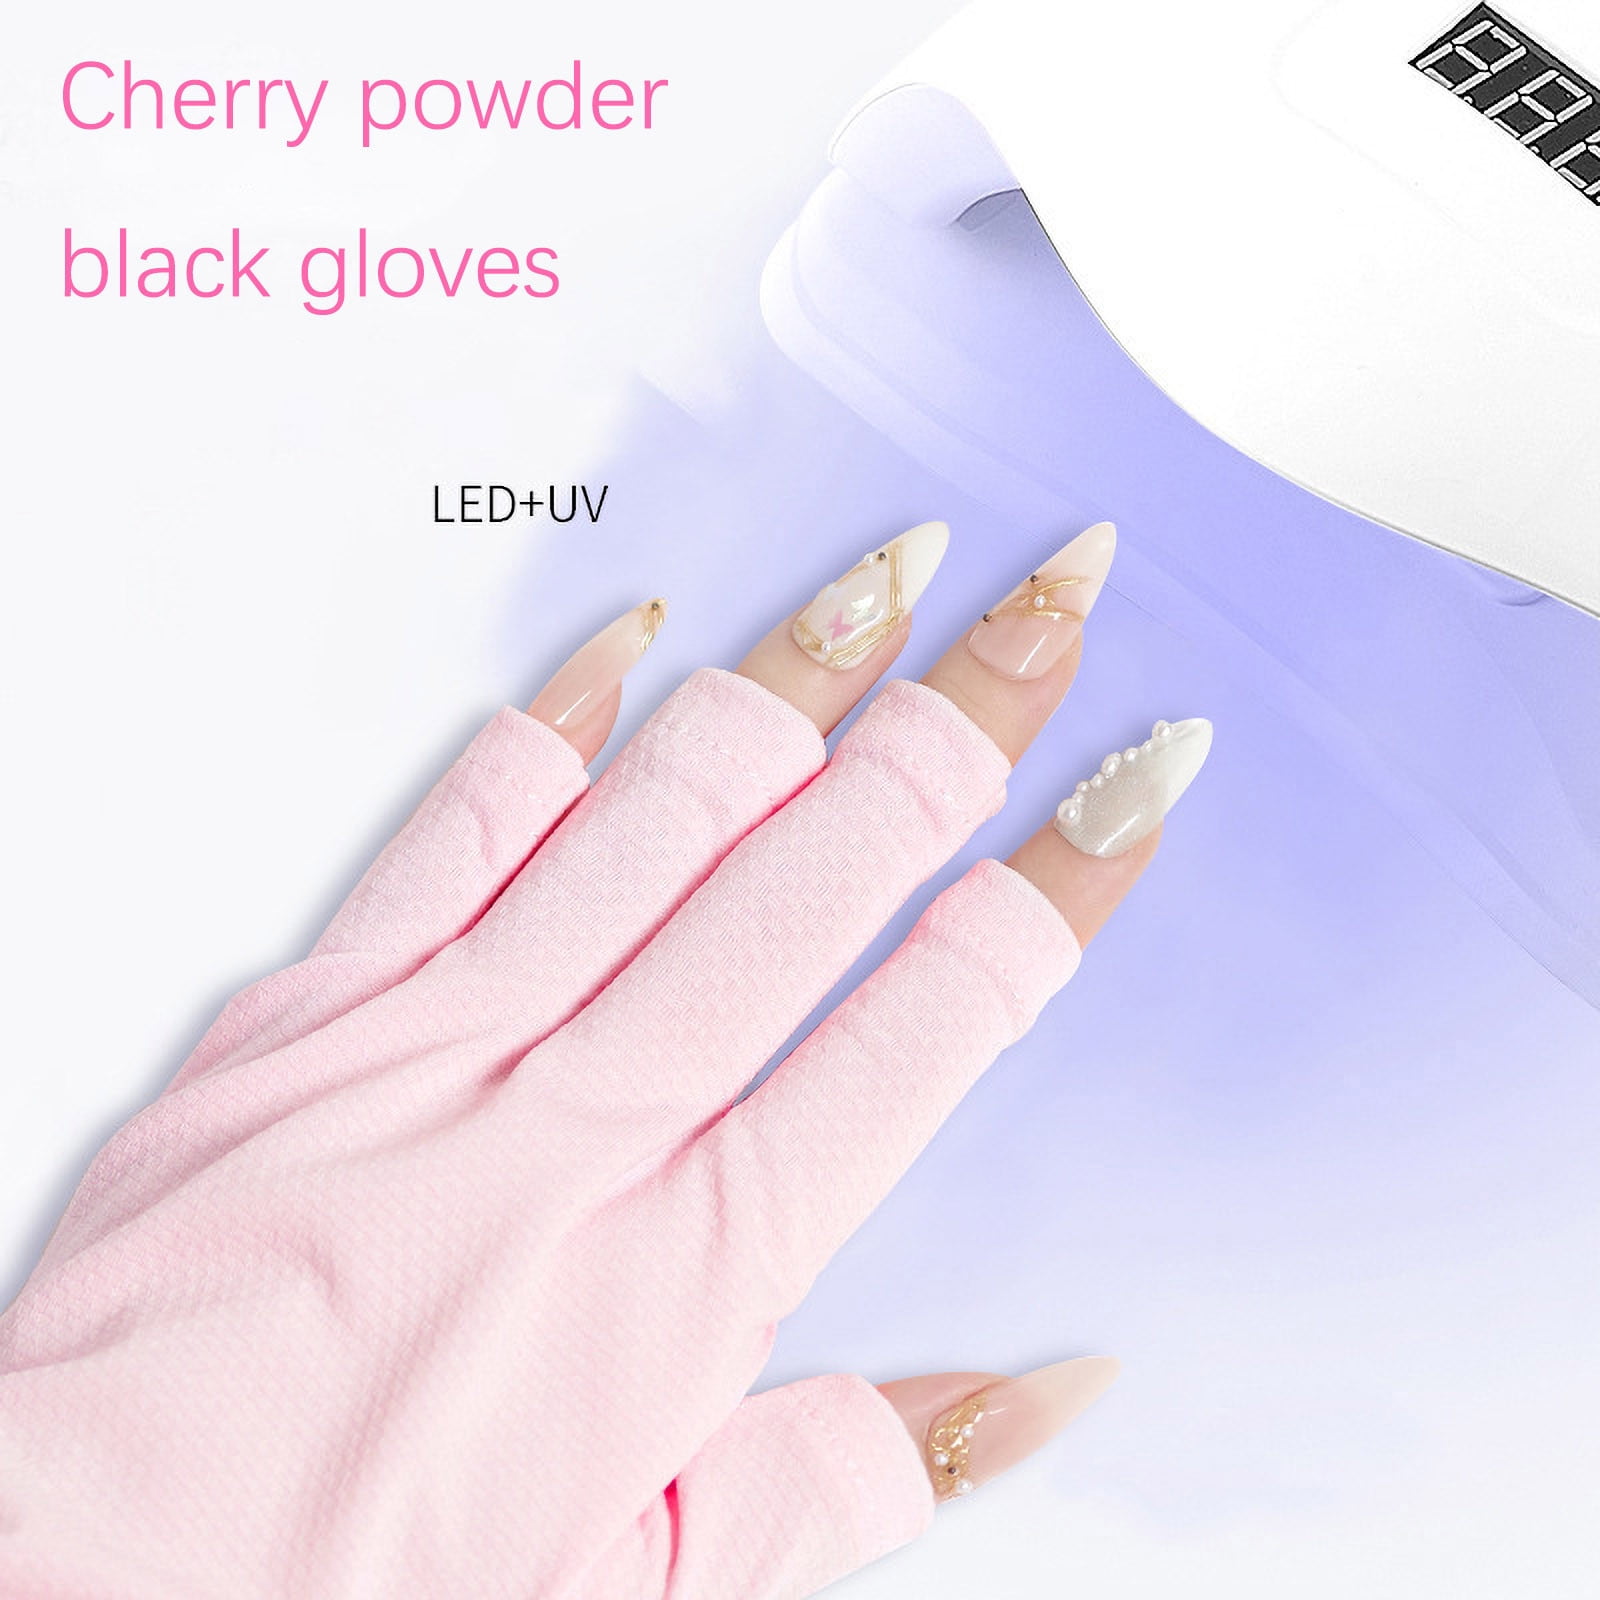 UV Gloves Gel Nail Lamp UV Shield Glove,Protection Gloves For Manicures, Protect Hands Nail Art Stretchy Fingerless Glove 